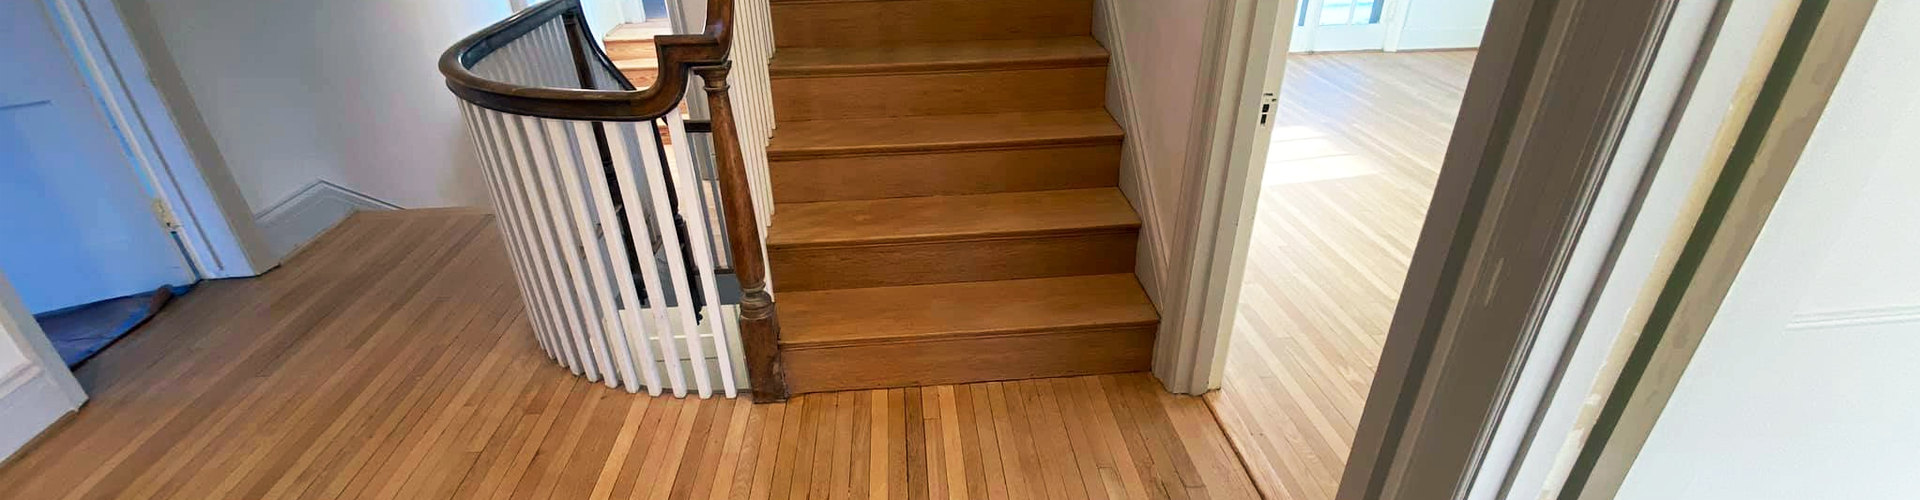 new floor install advice picture showing a renovation hardwood floors and stairs in Bel Air, Forest Hill, Fallston area in Maryland